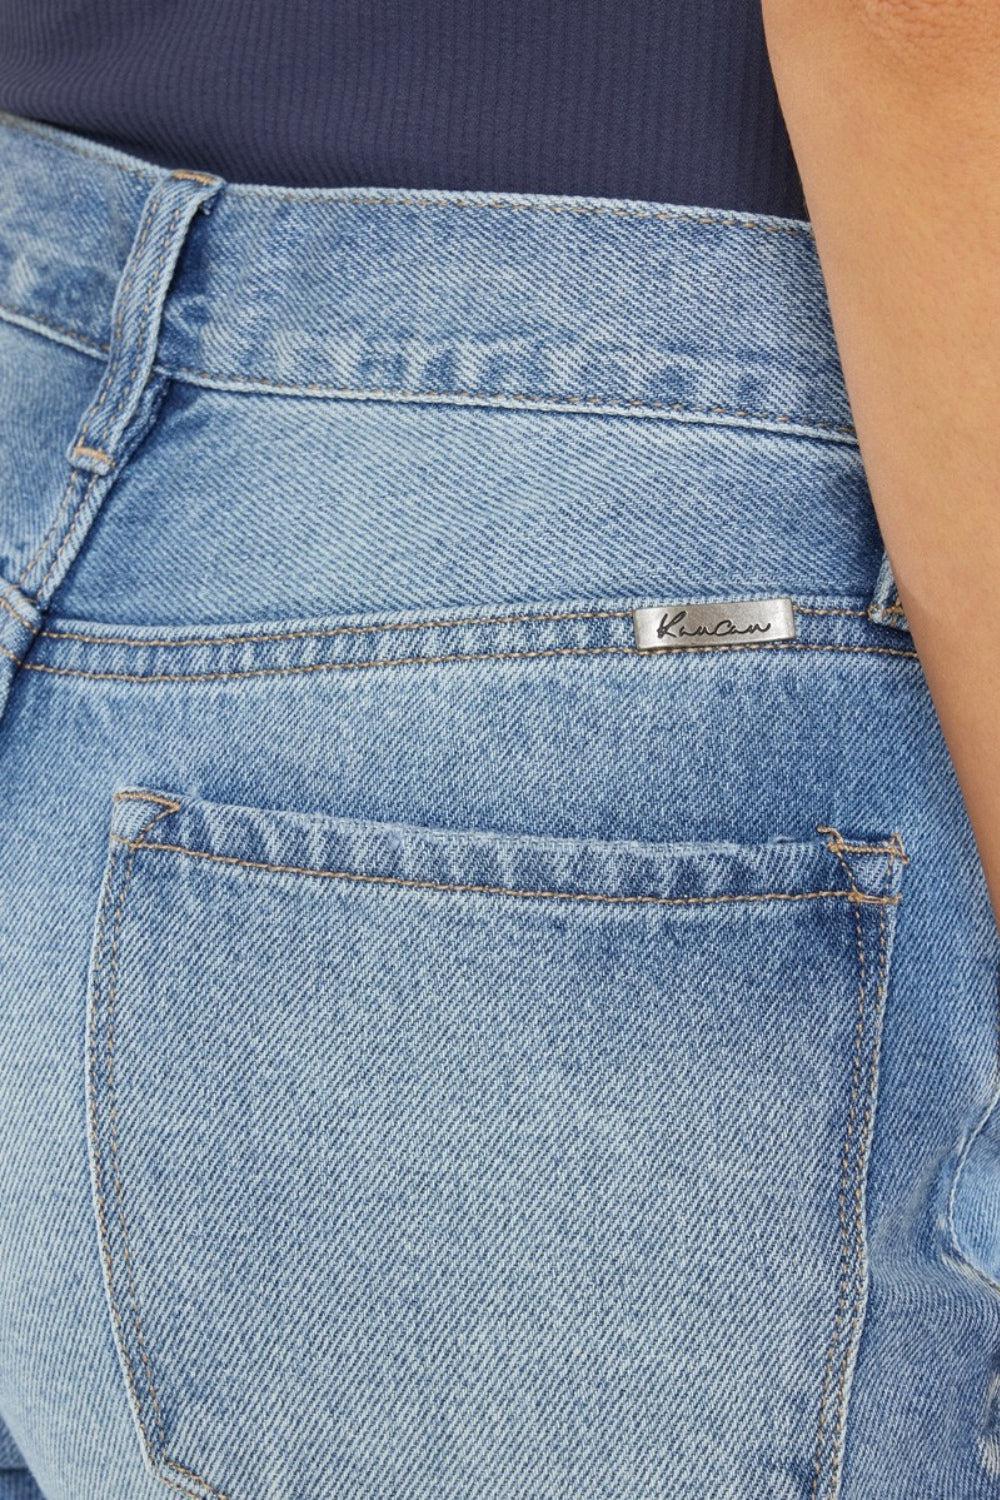 a close up of a woman's butt showing the back of her jeans